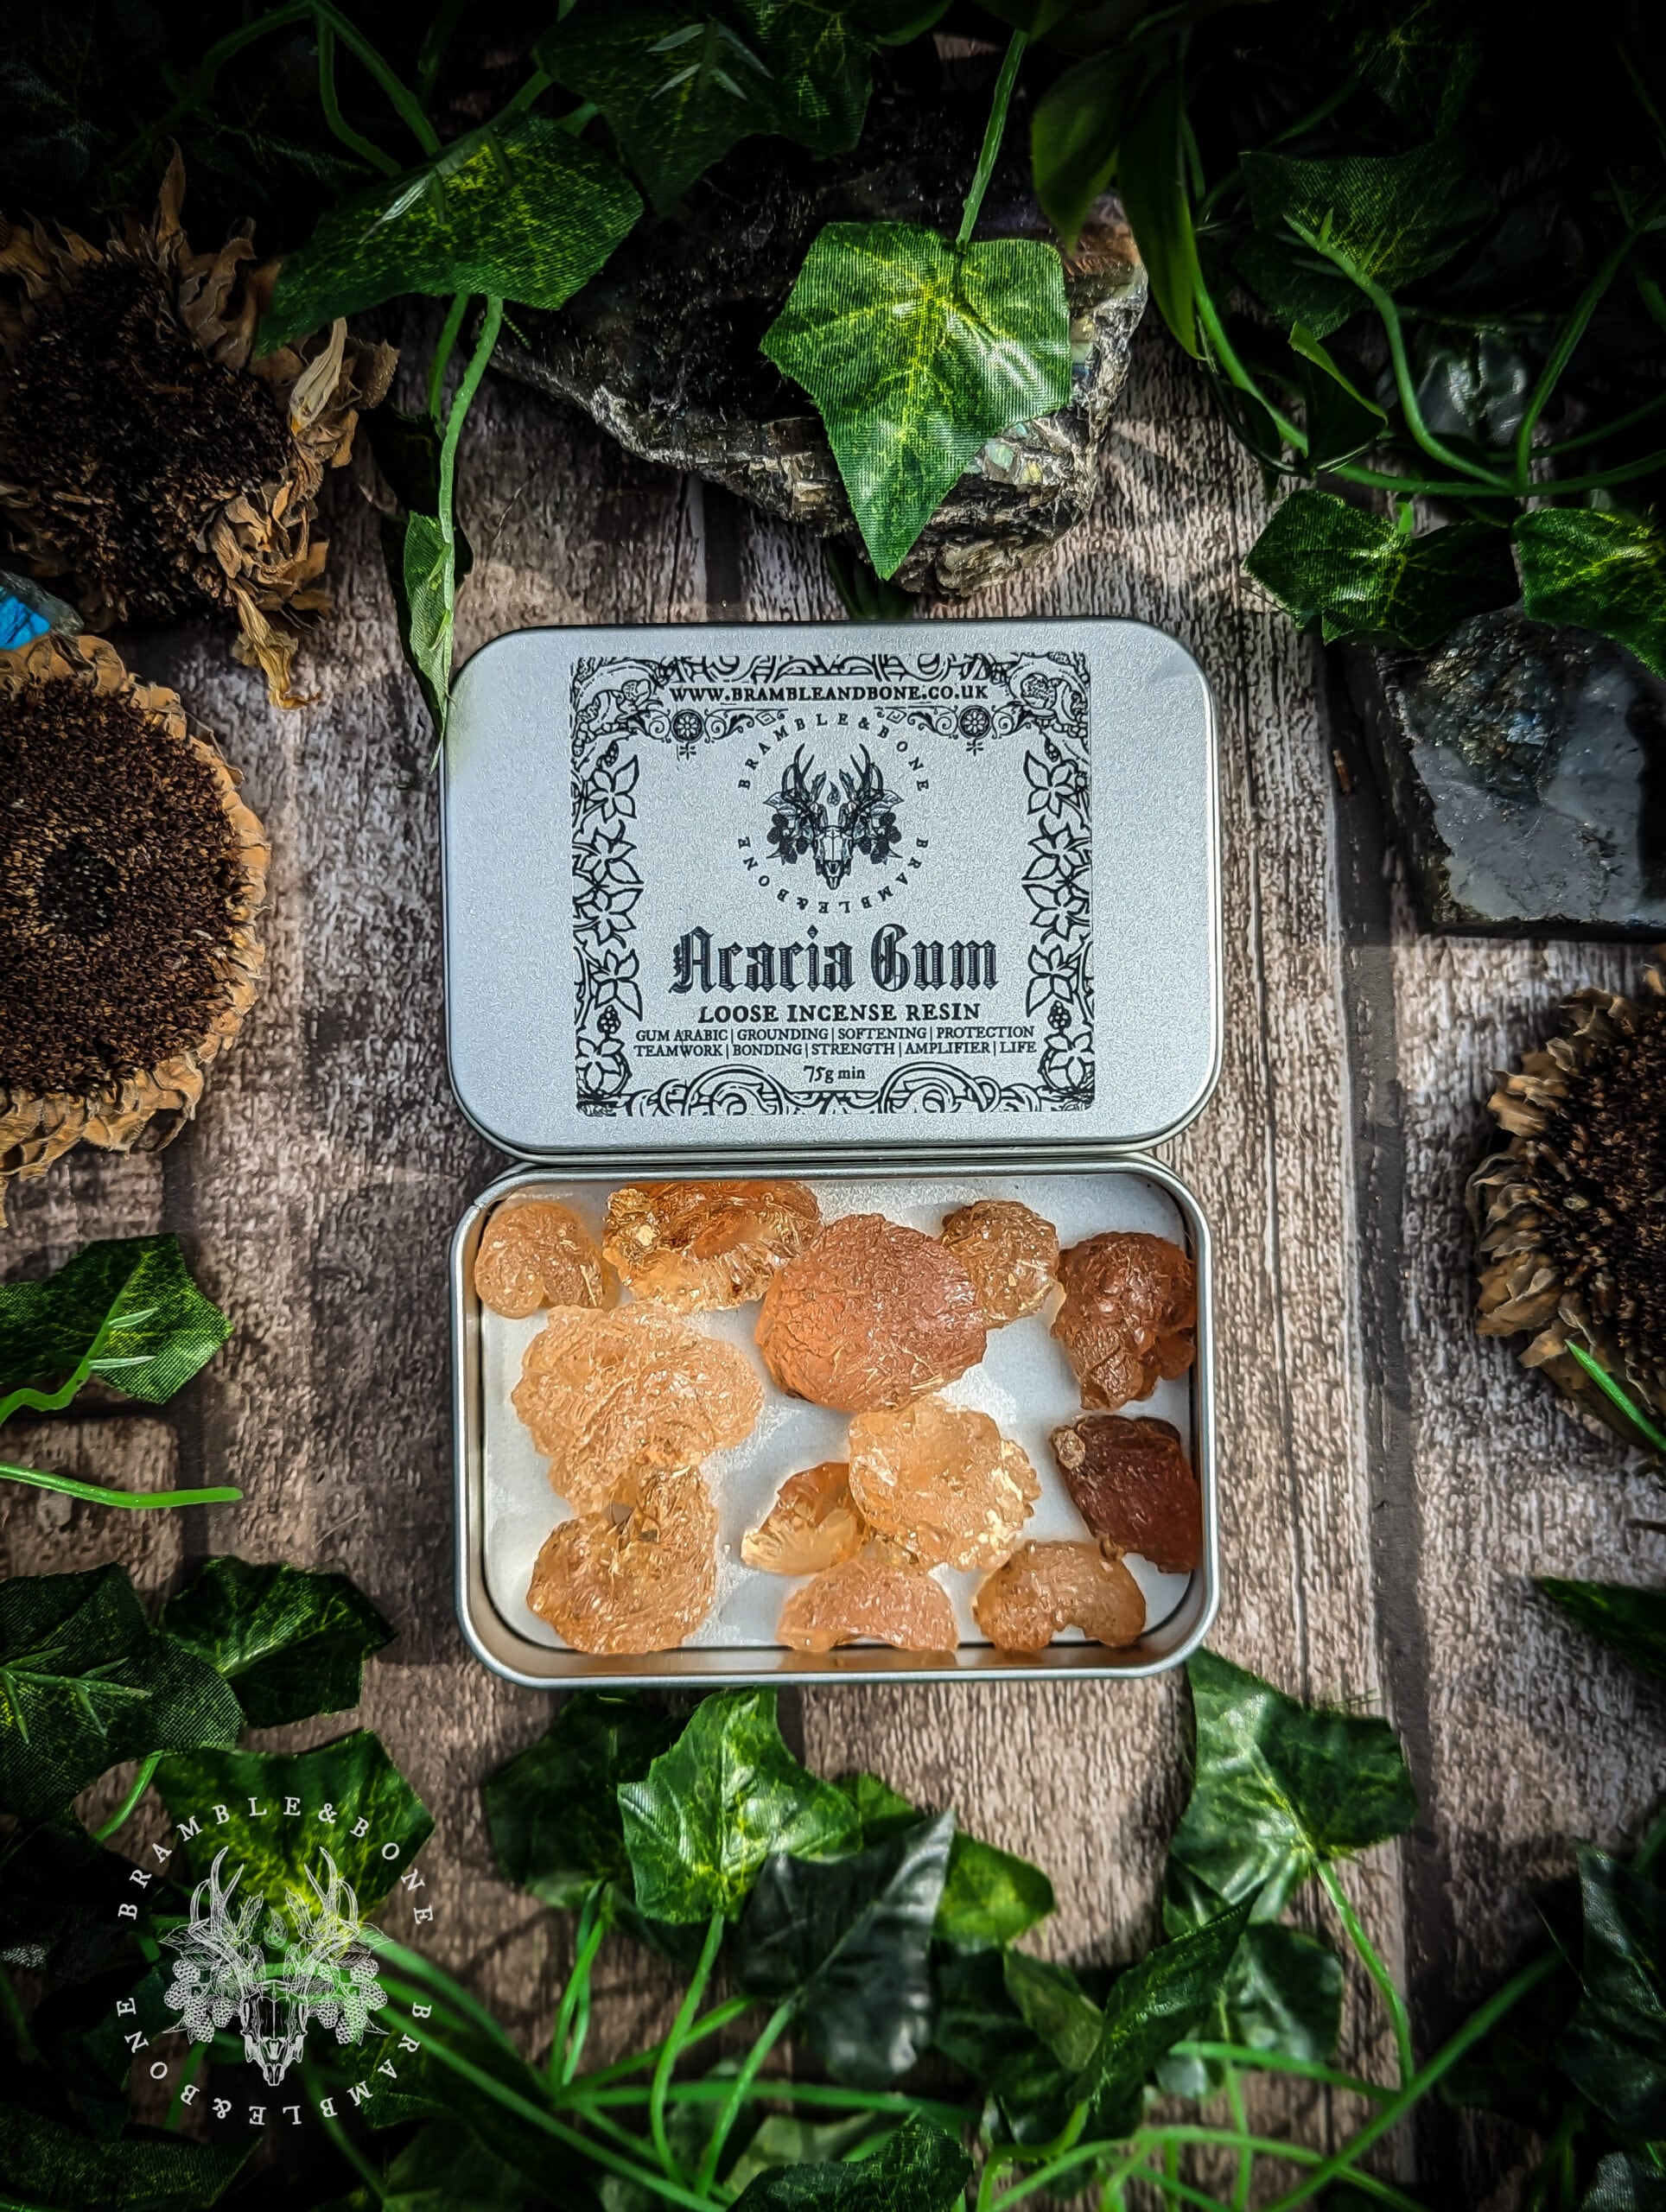 Gum Arabic Resin for Purification and Blessing